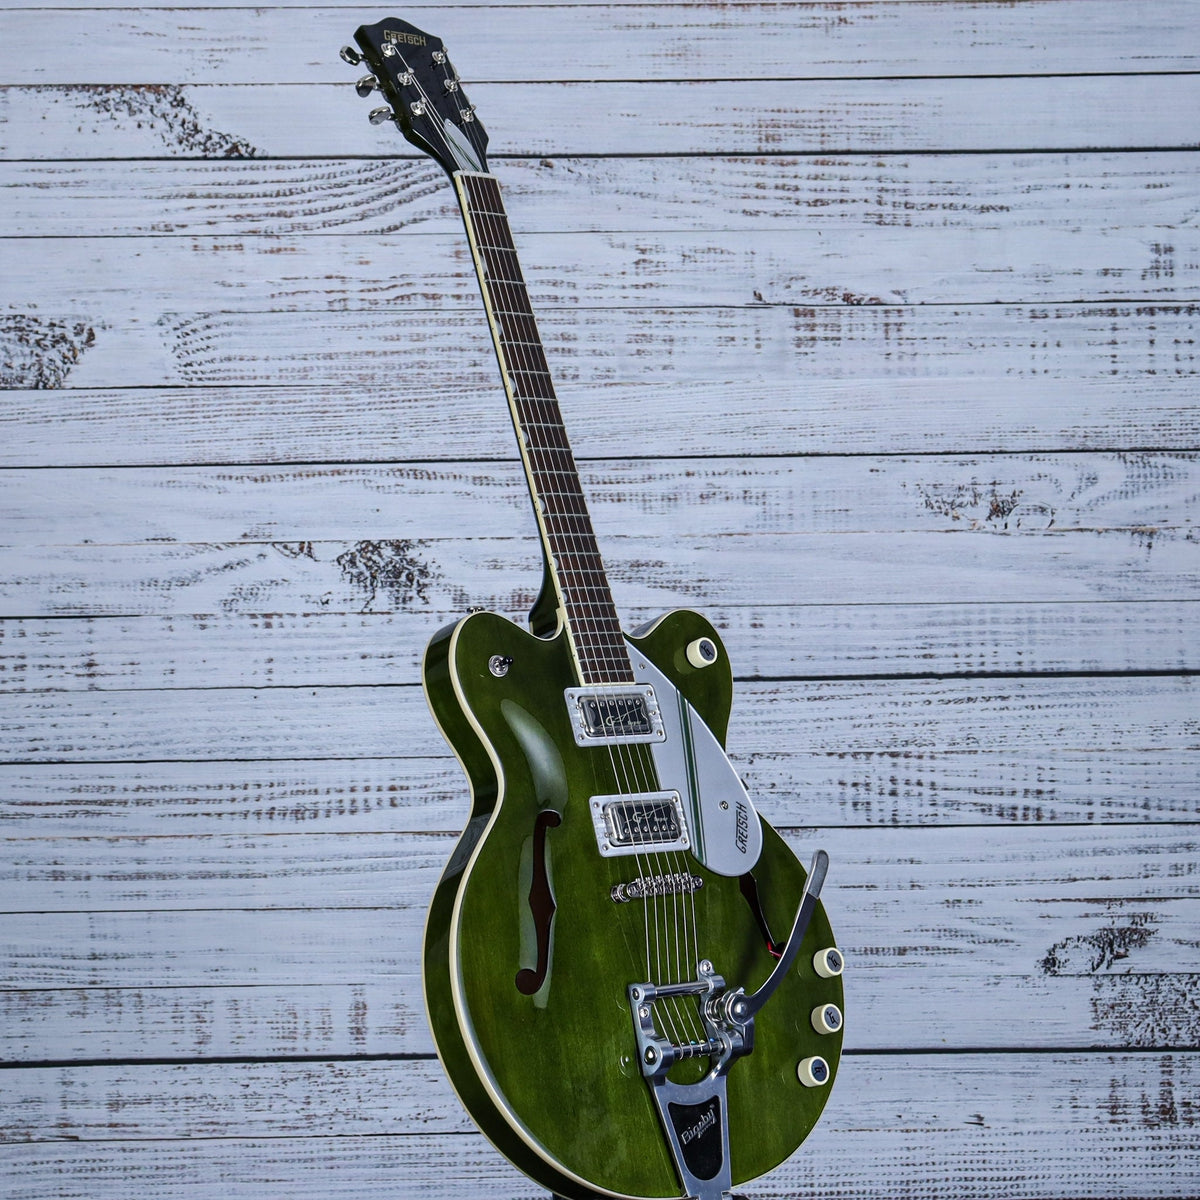 Gretsch Streamliner Rally II Electric Guitar | Rally Green Stain